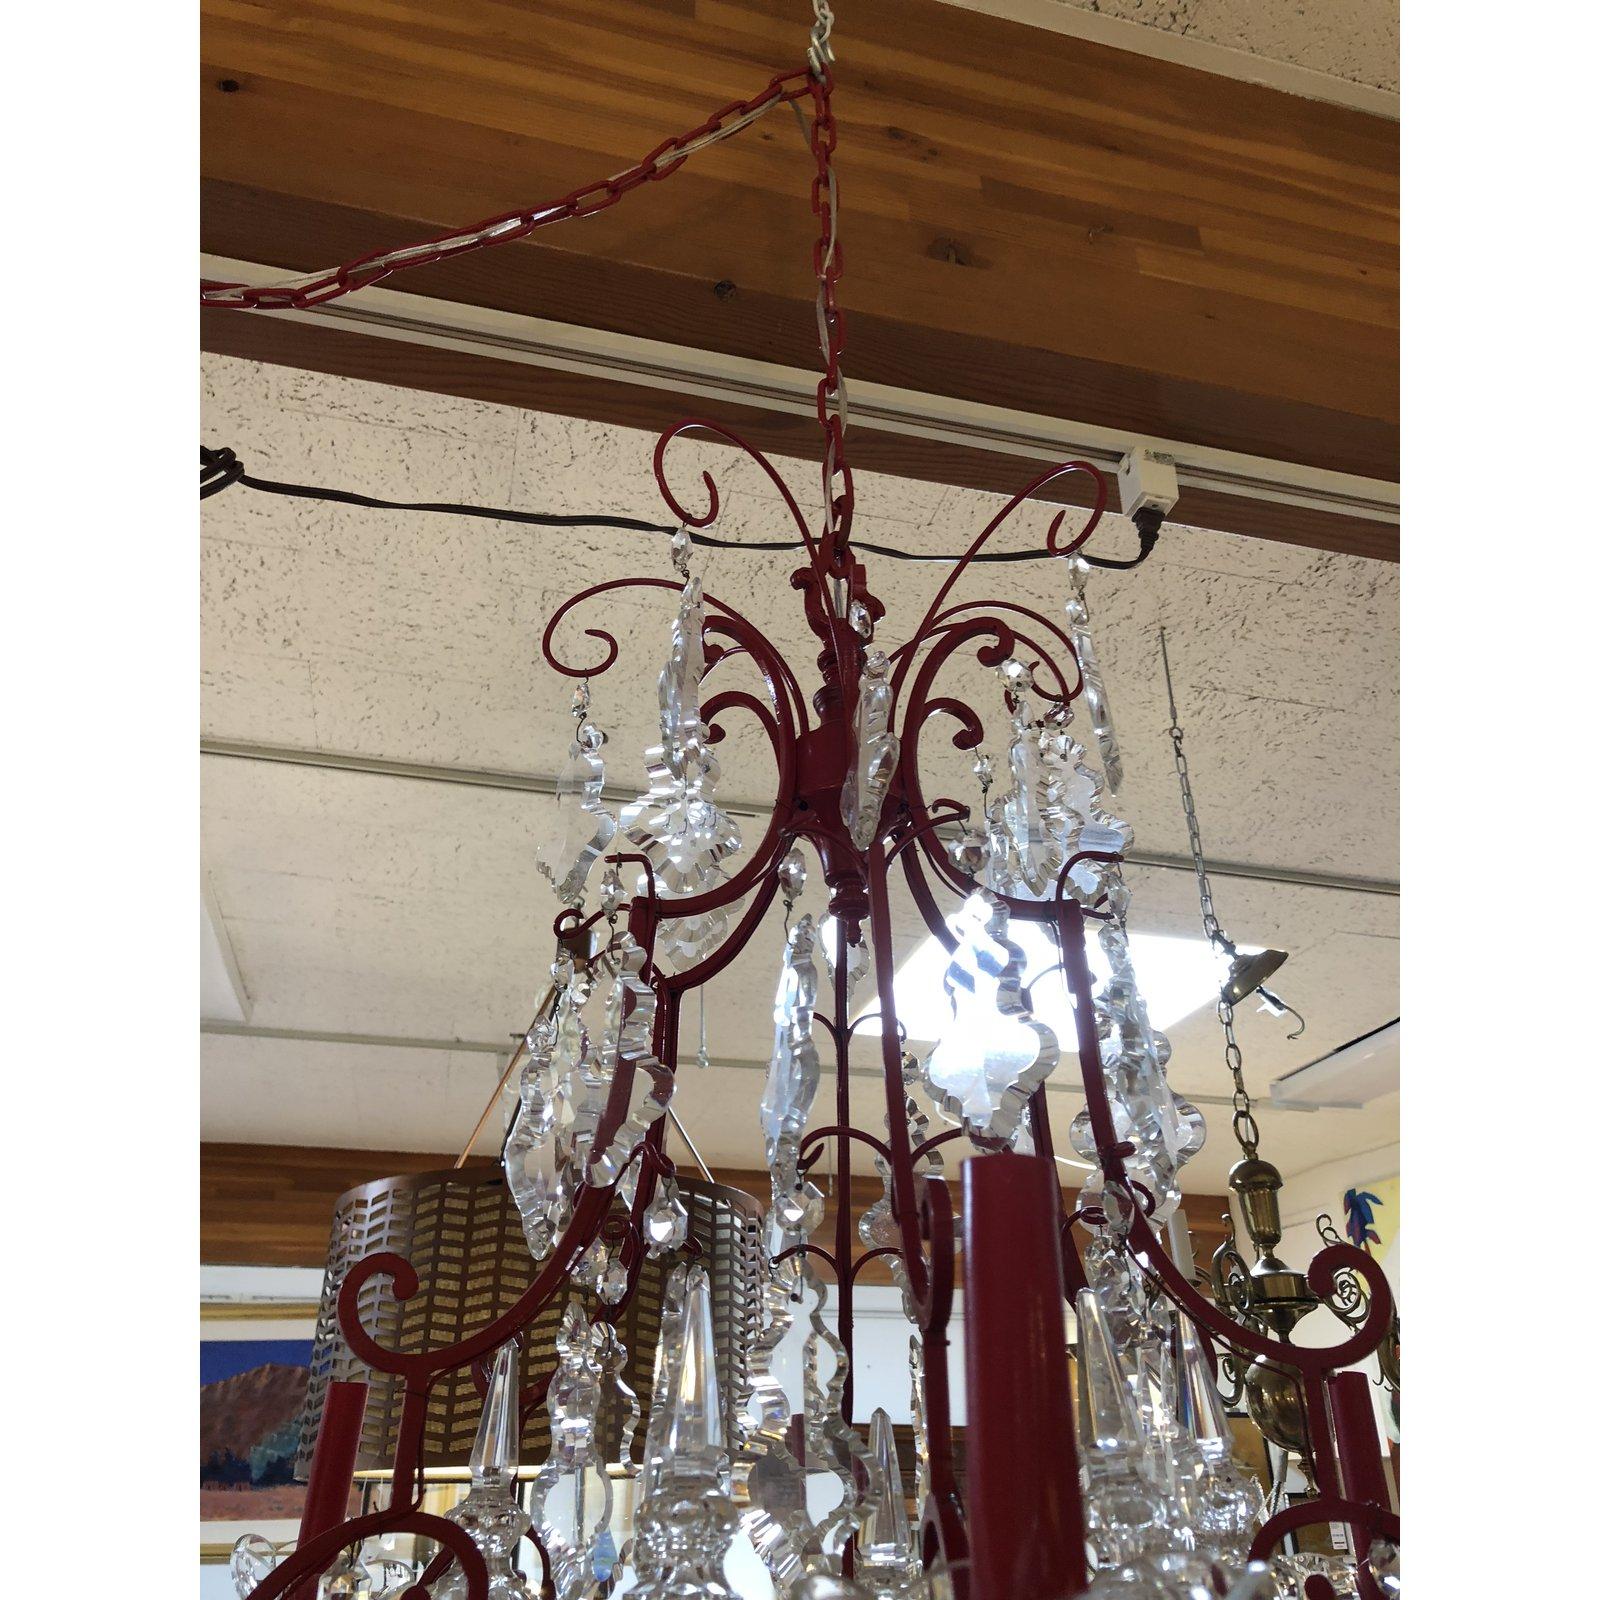 A vintage six-light chandelier. The frame is bronze, which has recently been finished to a fire engine red to create that POP! of color in your space. Cut crystals hang from all tiers of the chandelier. The candelabra candle covers and chain are in